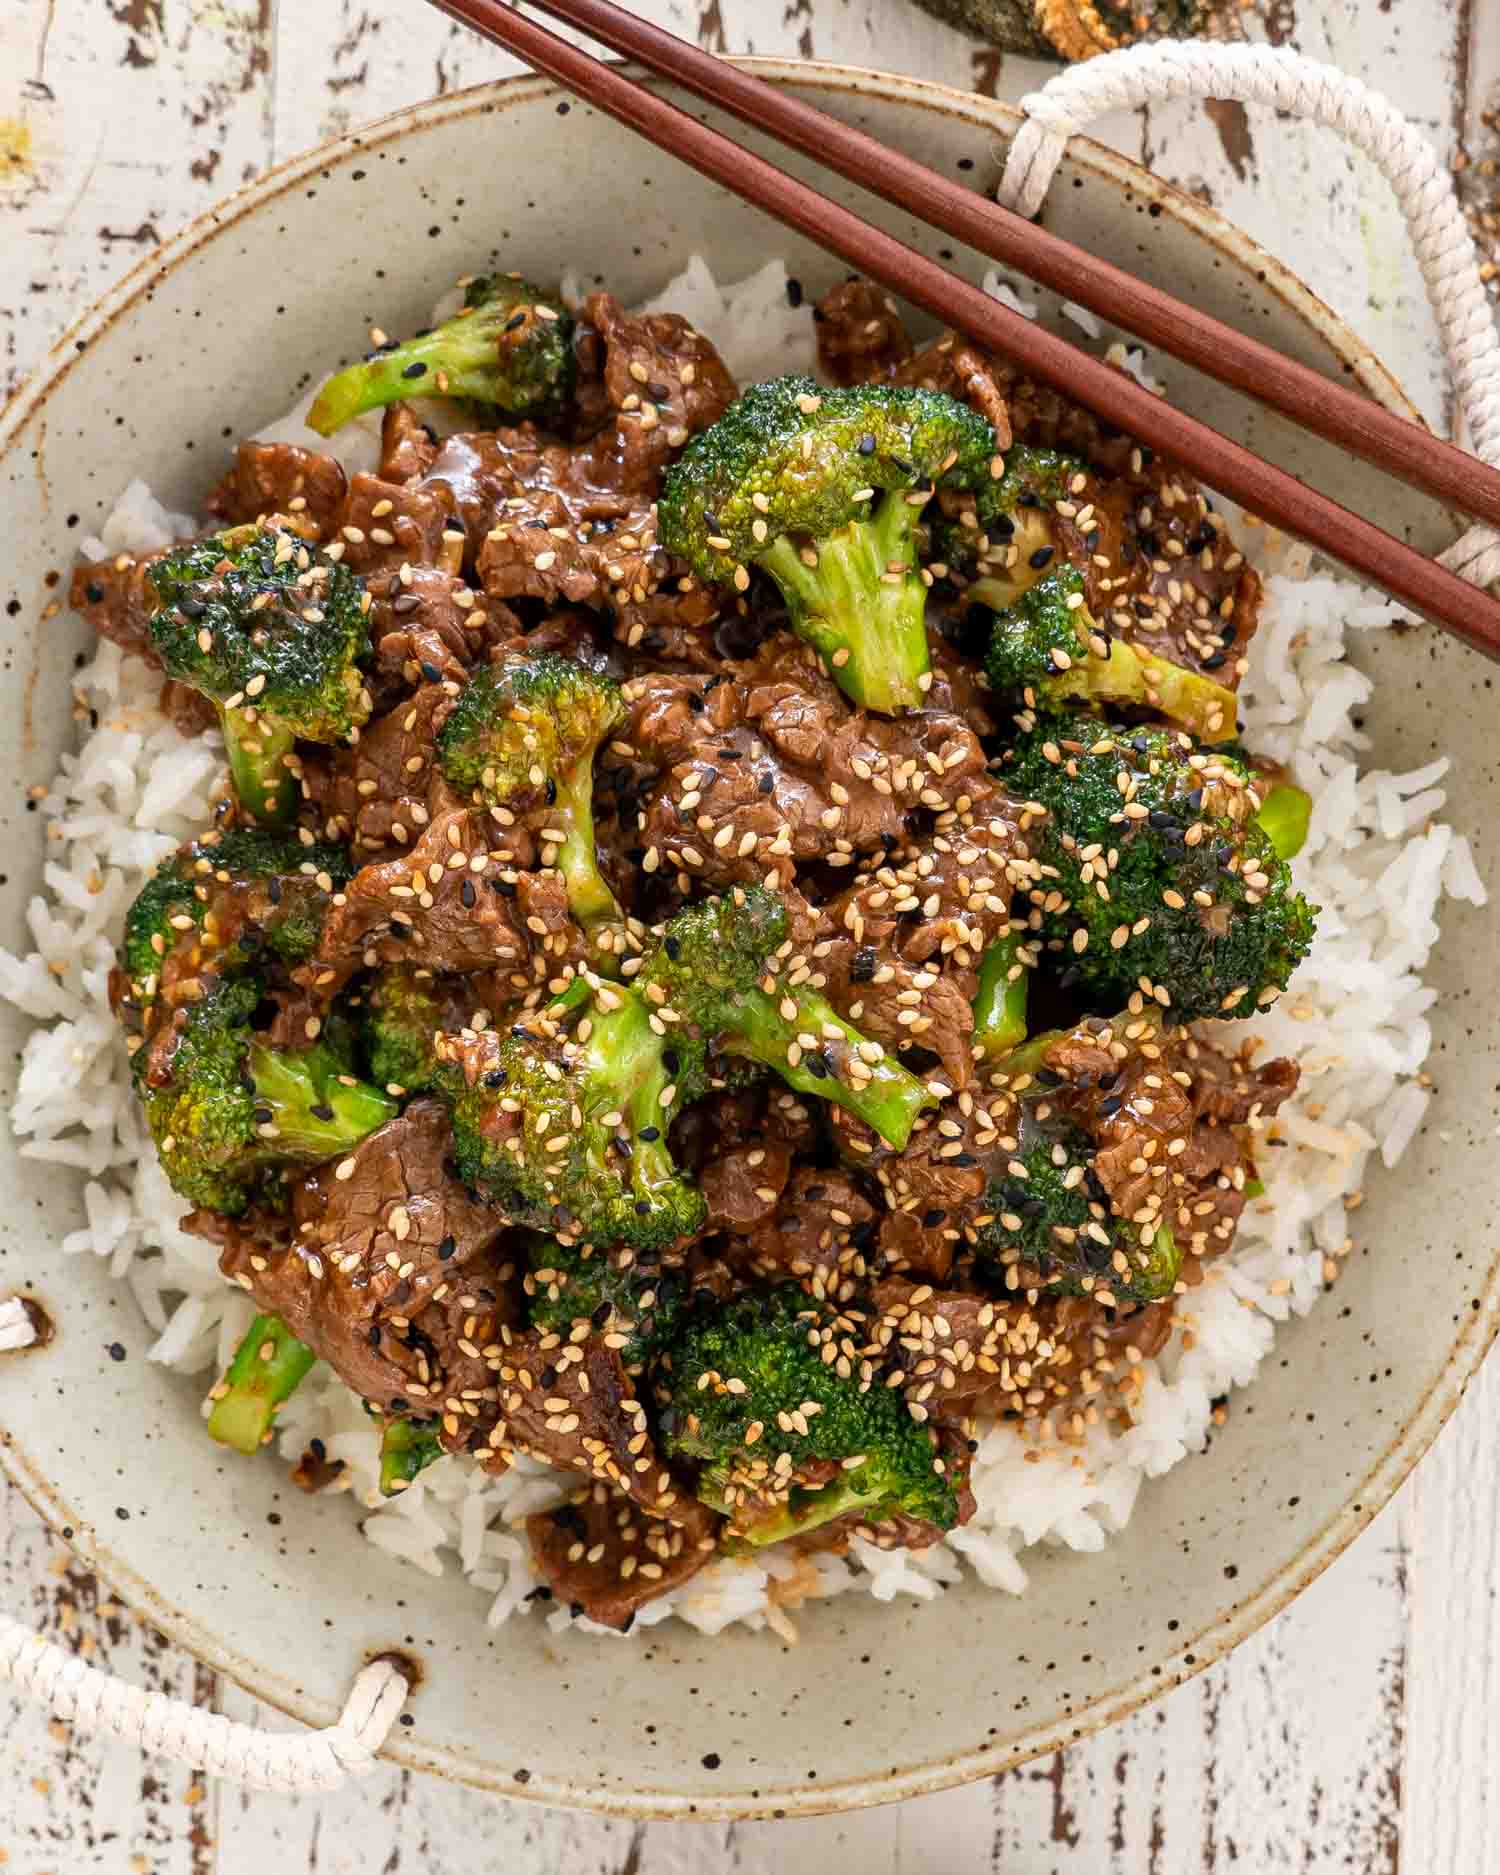 beef and broccoli that was made in an instant pot over a bed of rice in a bowl.